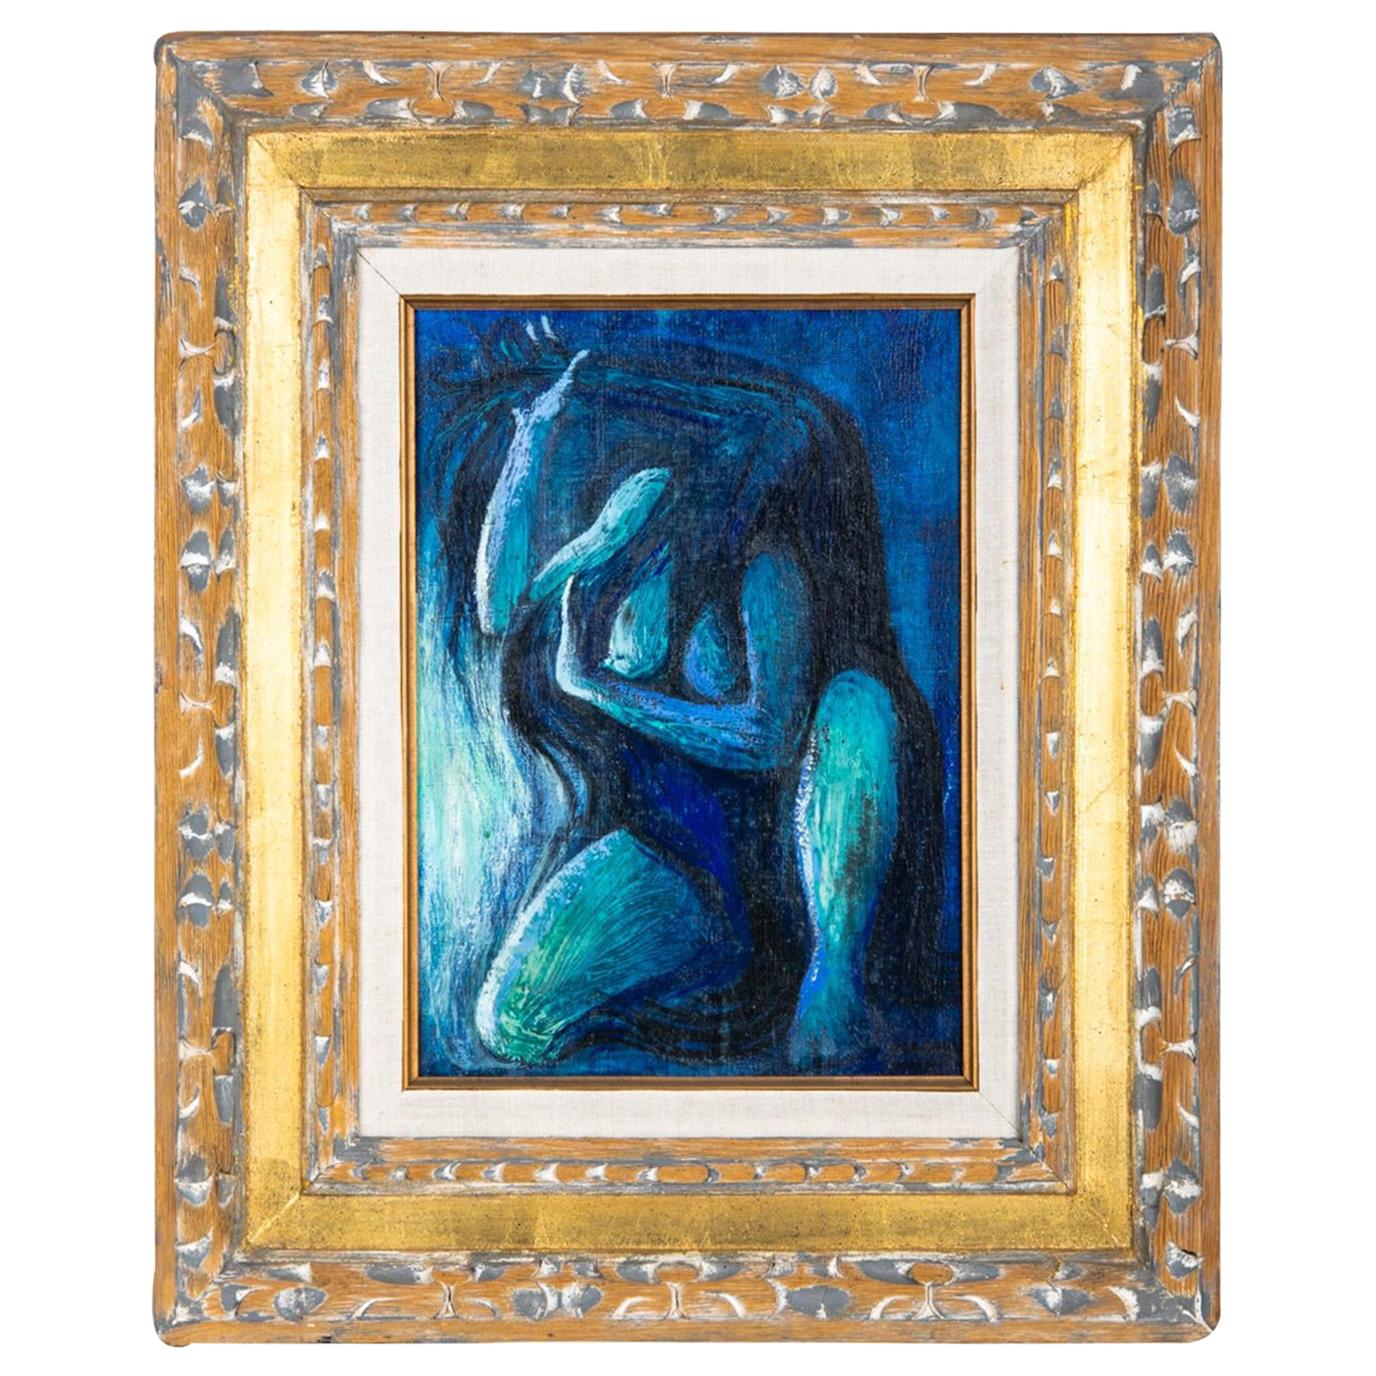 "Figure in Blue", Oil on Canvas, Framed